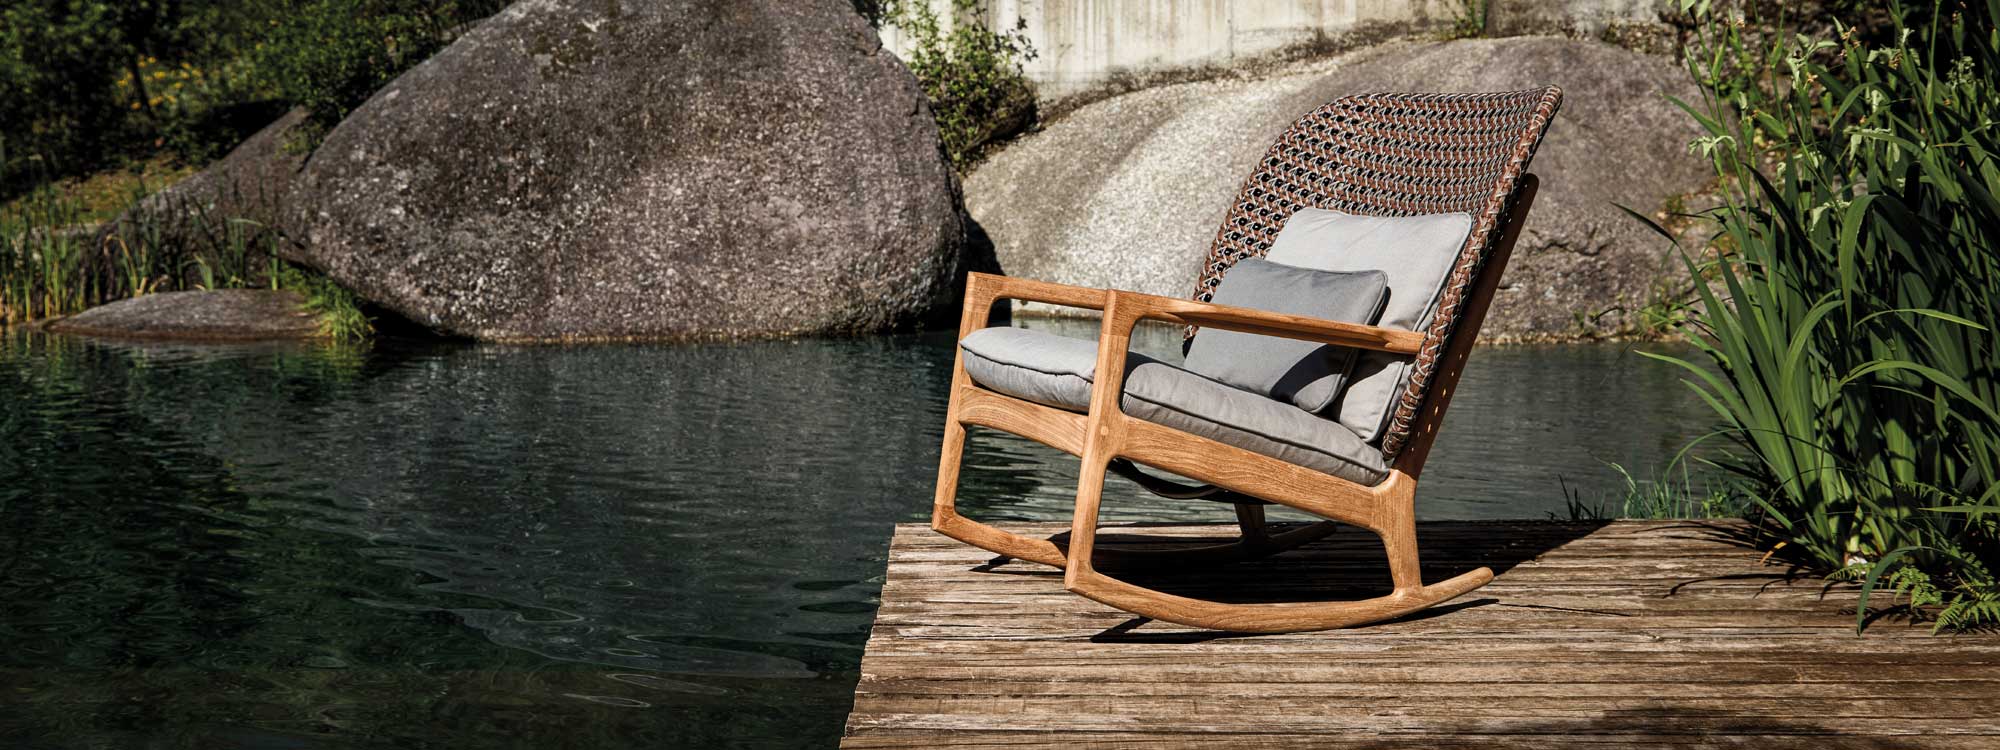 Image of Gloster Kay wicker garden rocking chair on wooden deck next to lake with large boulders in the background